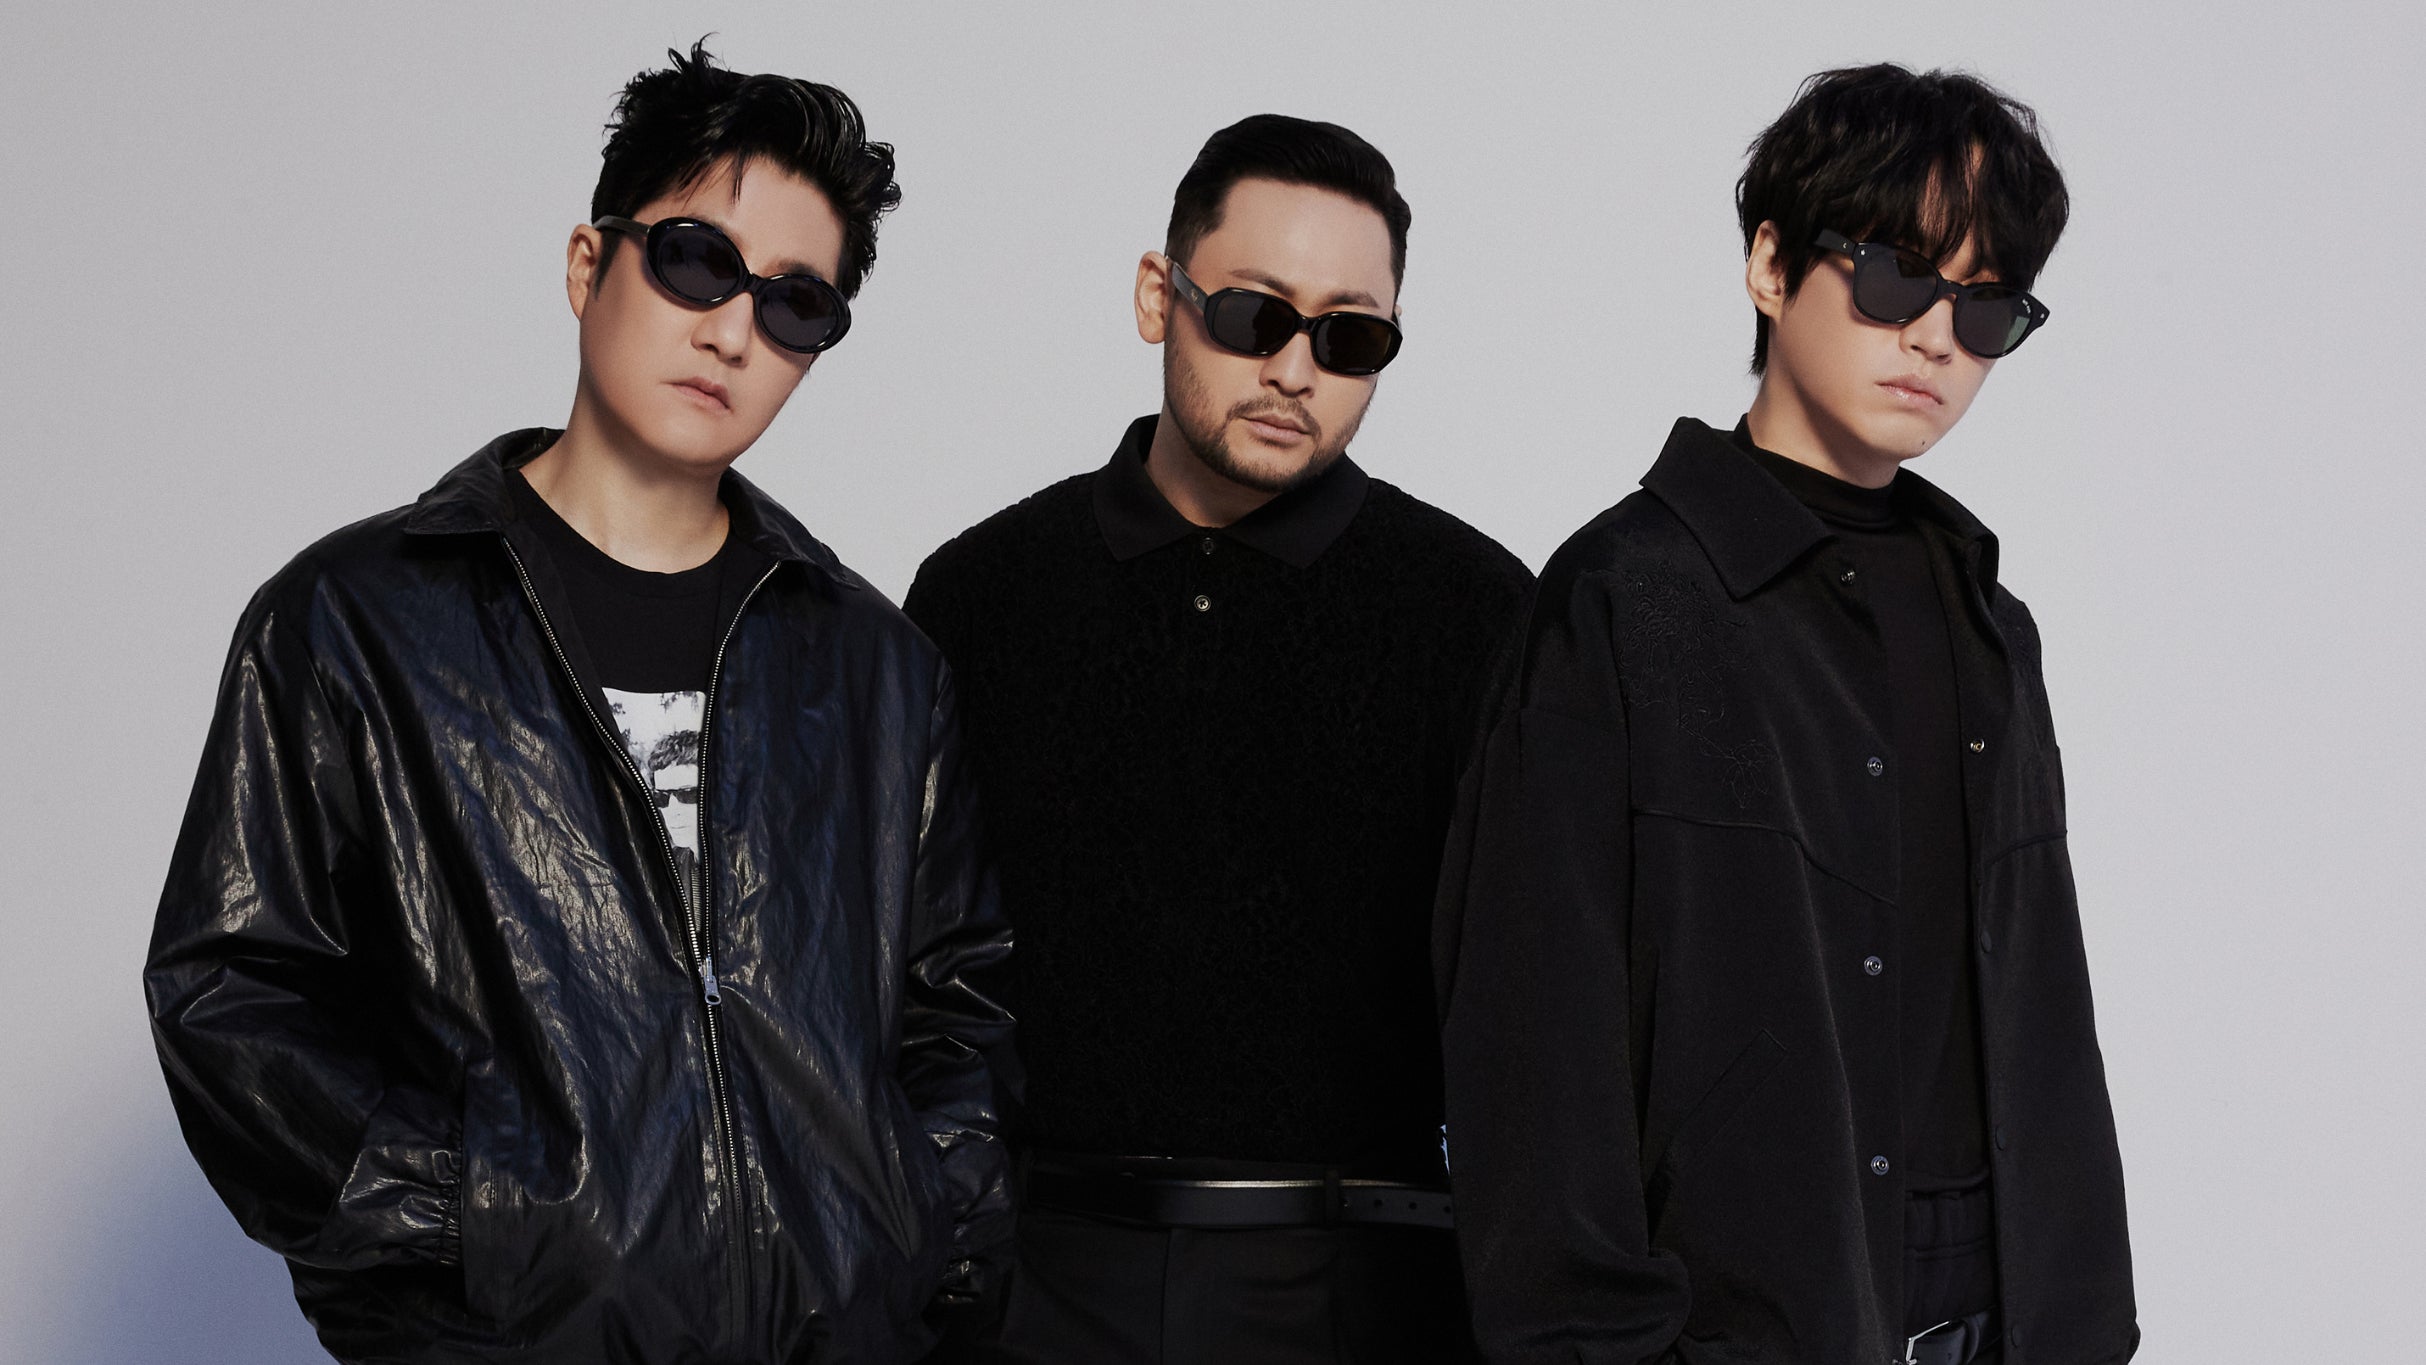 EPIK HIGH - All Time High Tour presale code for real tickets in Toronto